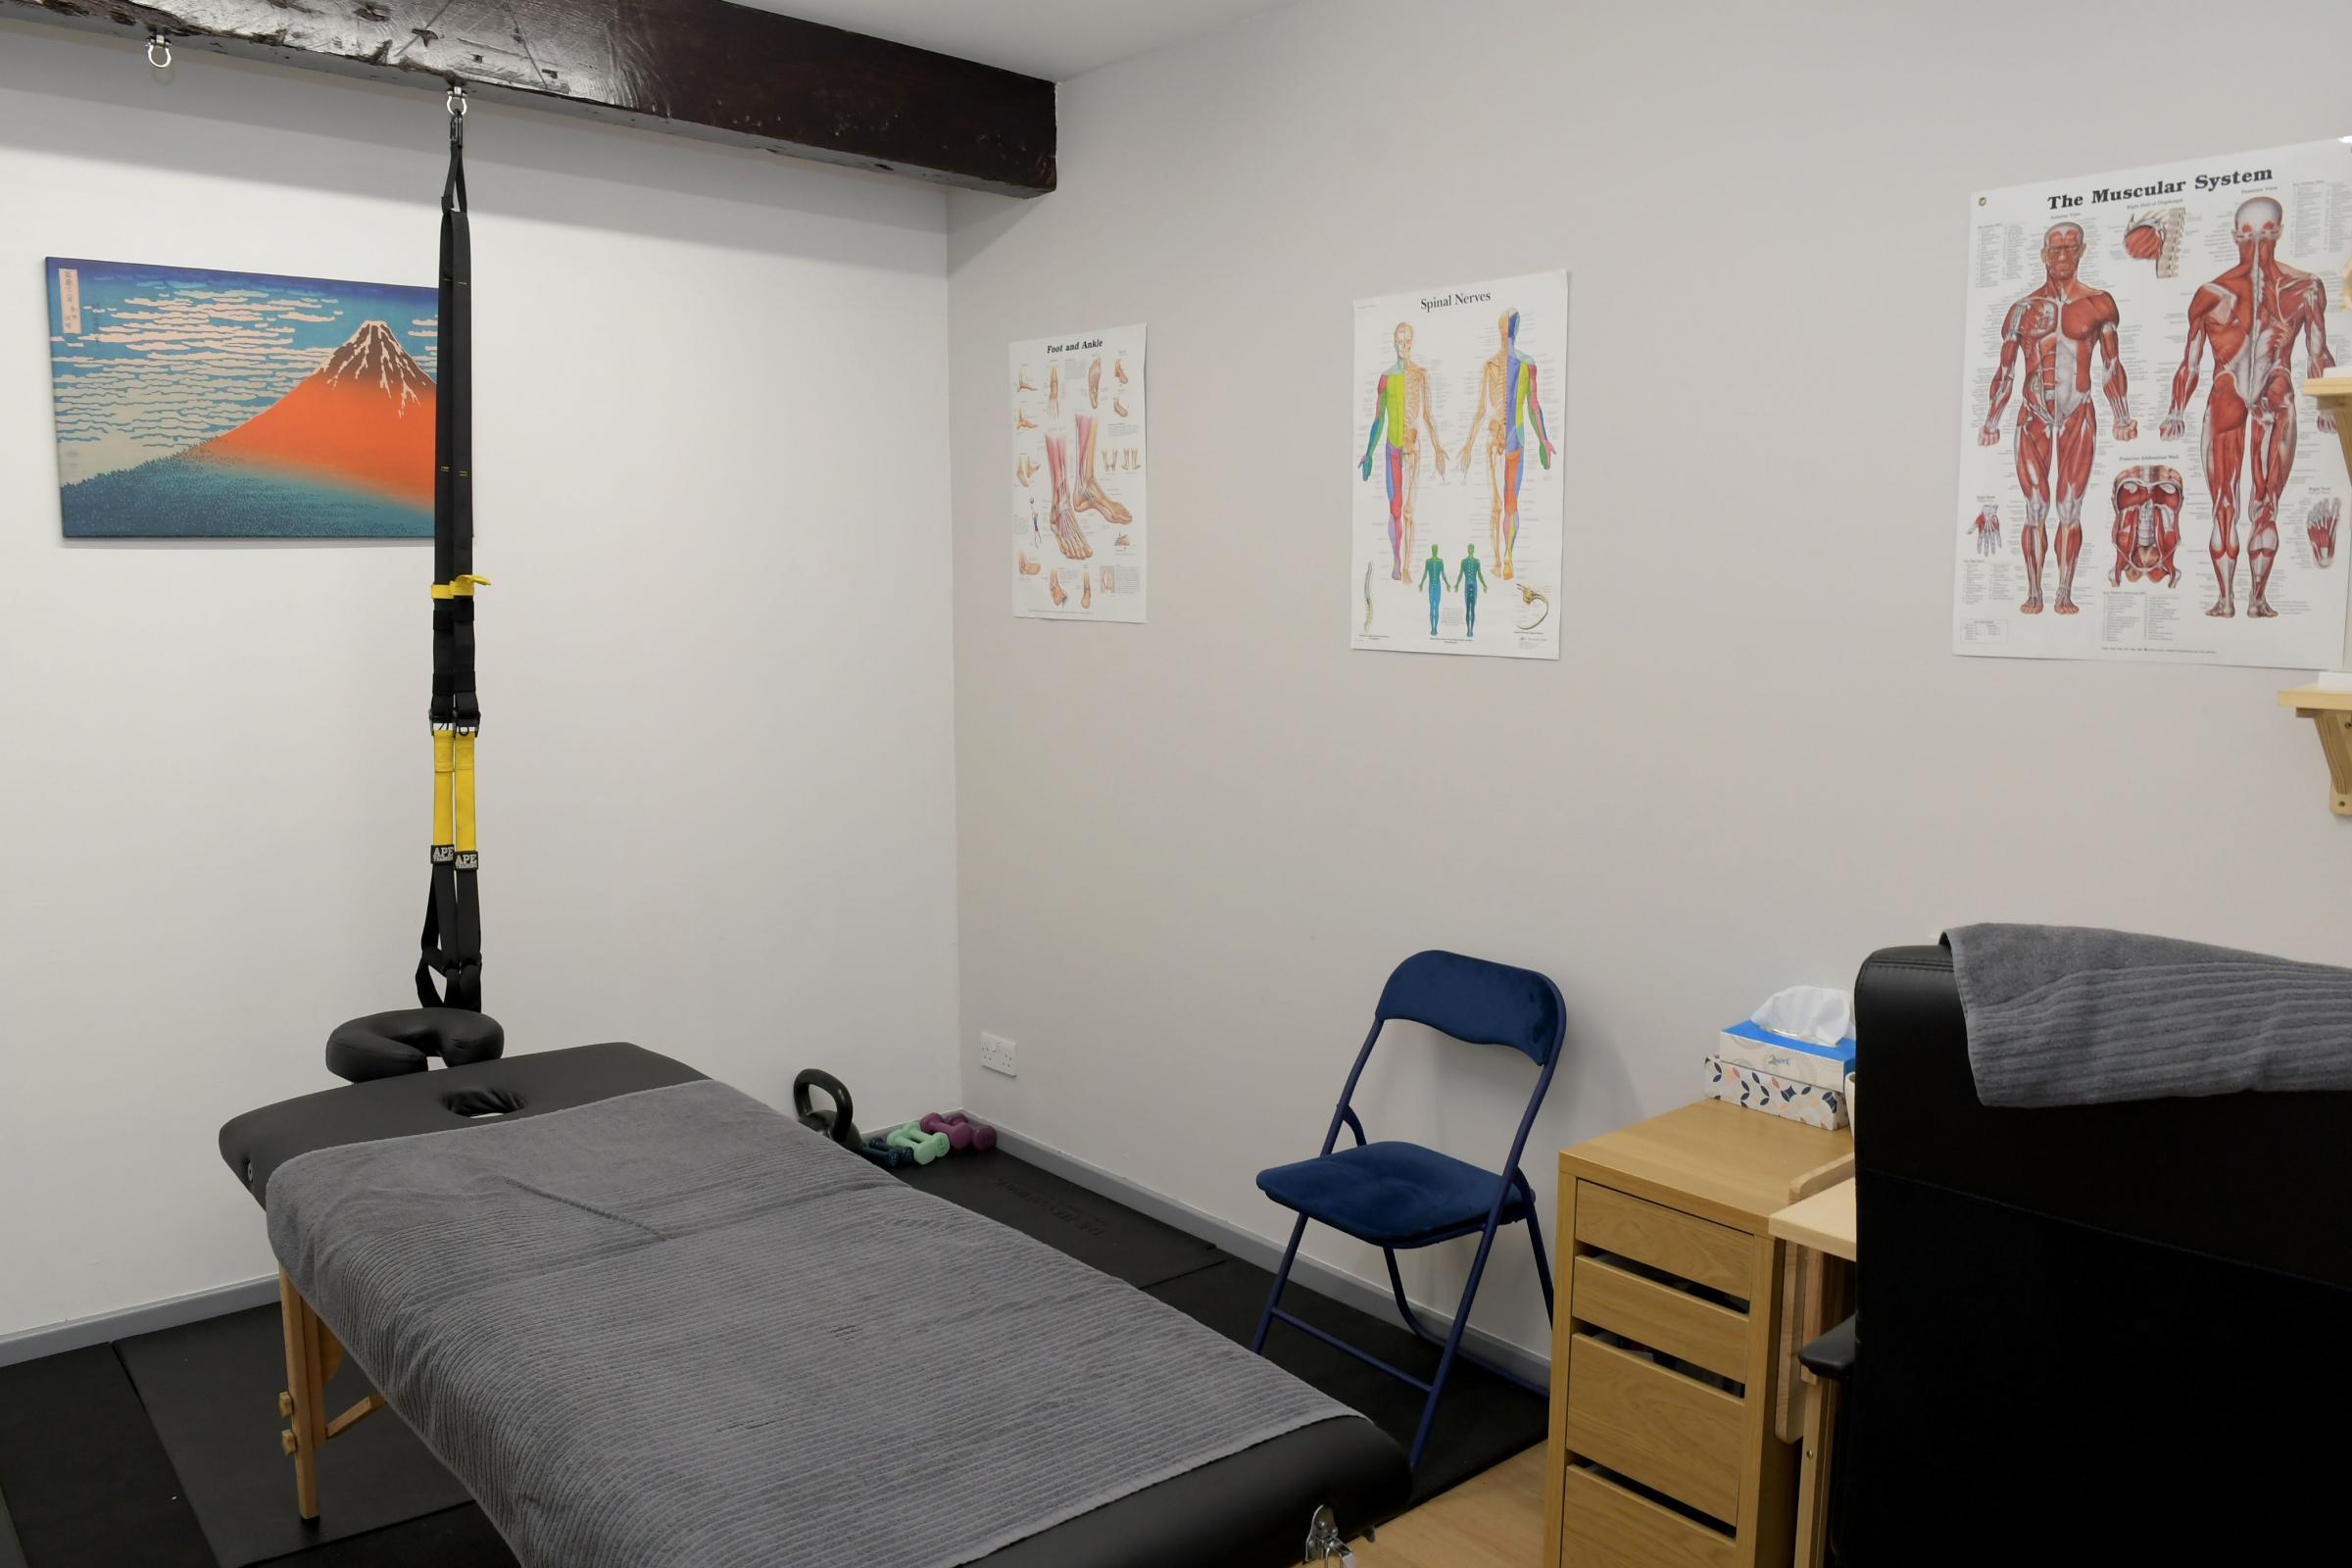 The physio space is larger than previously